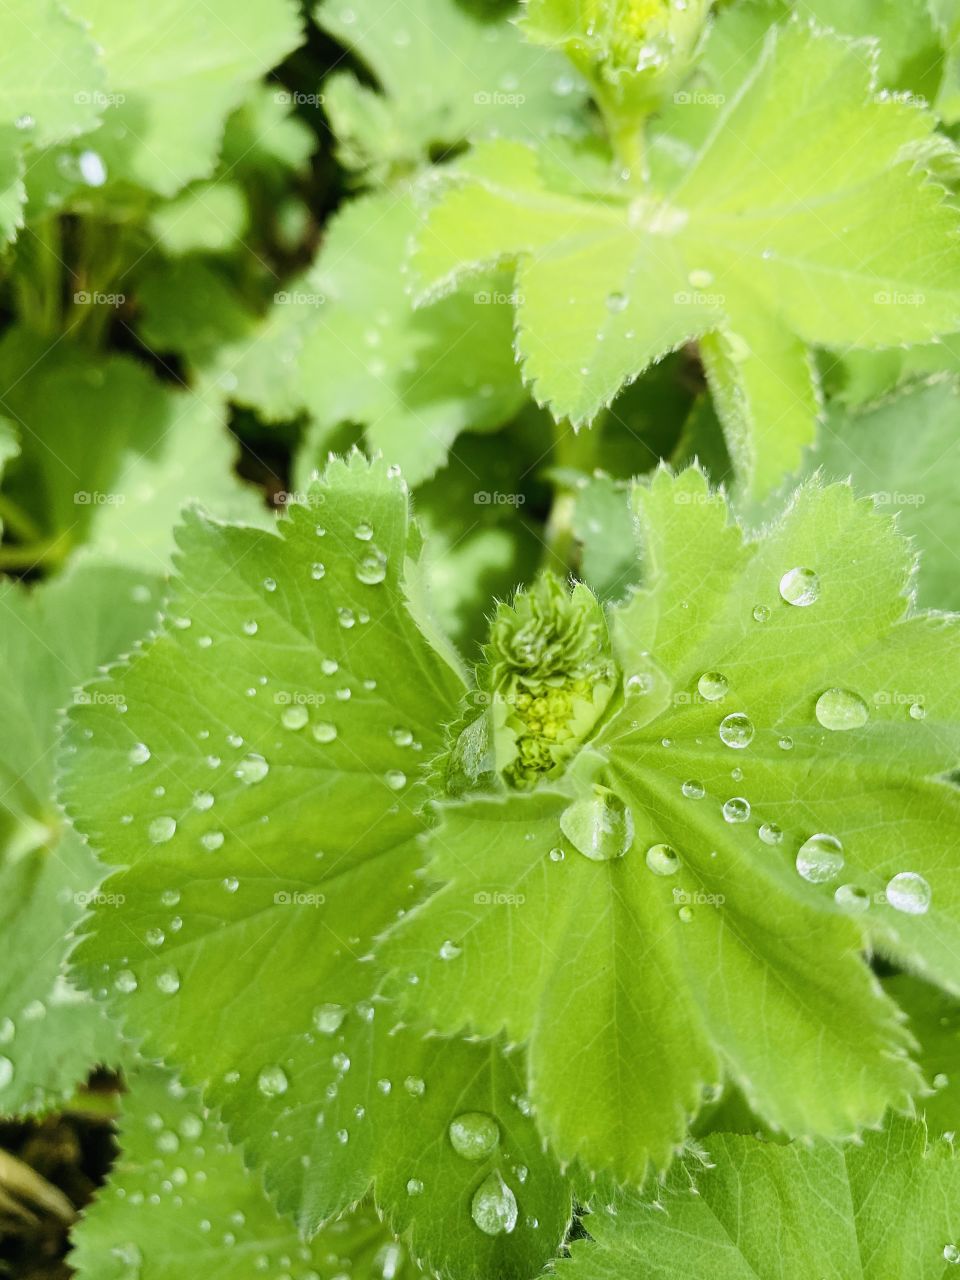 Gorgeous brightly green colored leaf covered in water droplets after spring light rainfall! 